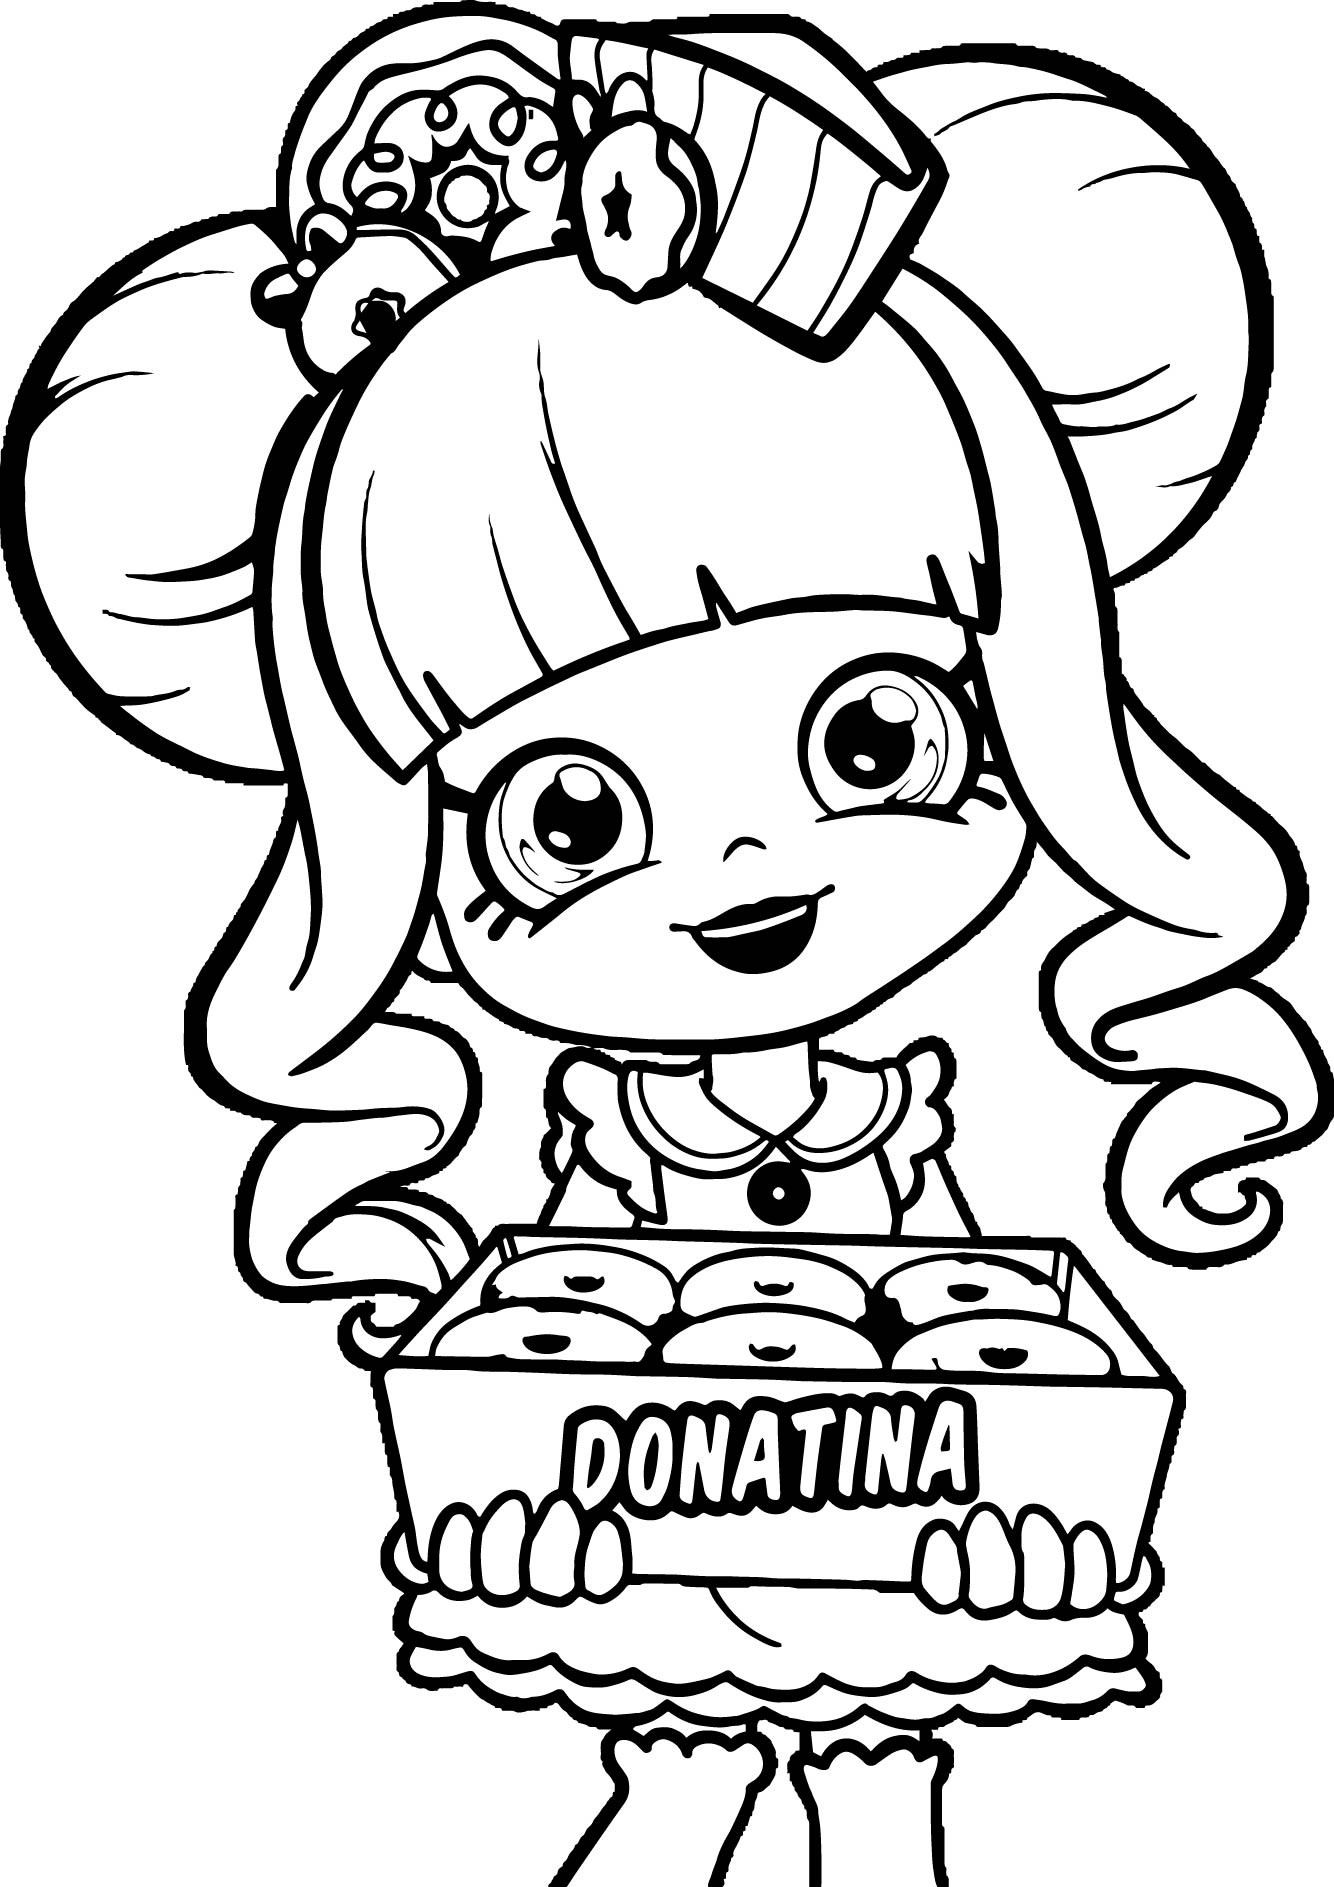 Coloring Pages For Girls Shopkins
 Shopkins Donatina Girl Coloring Page